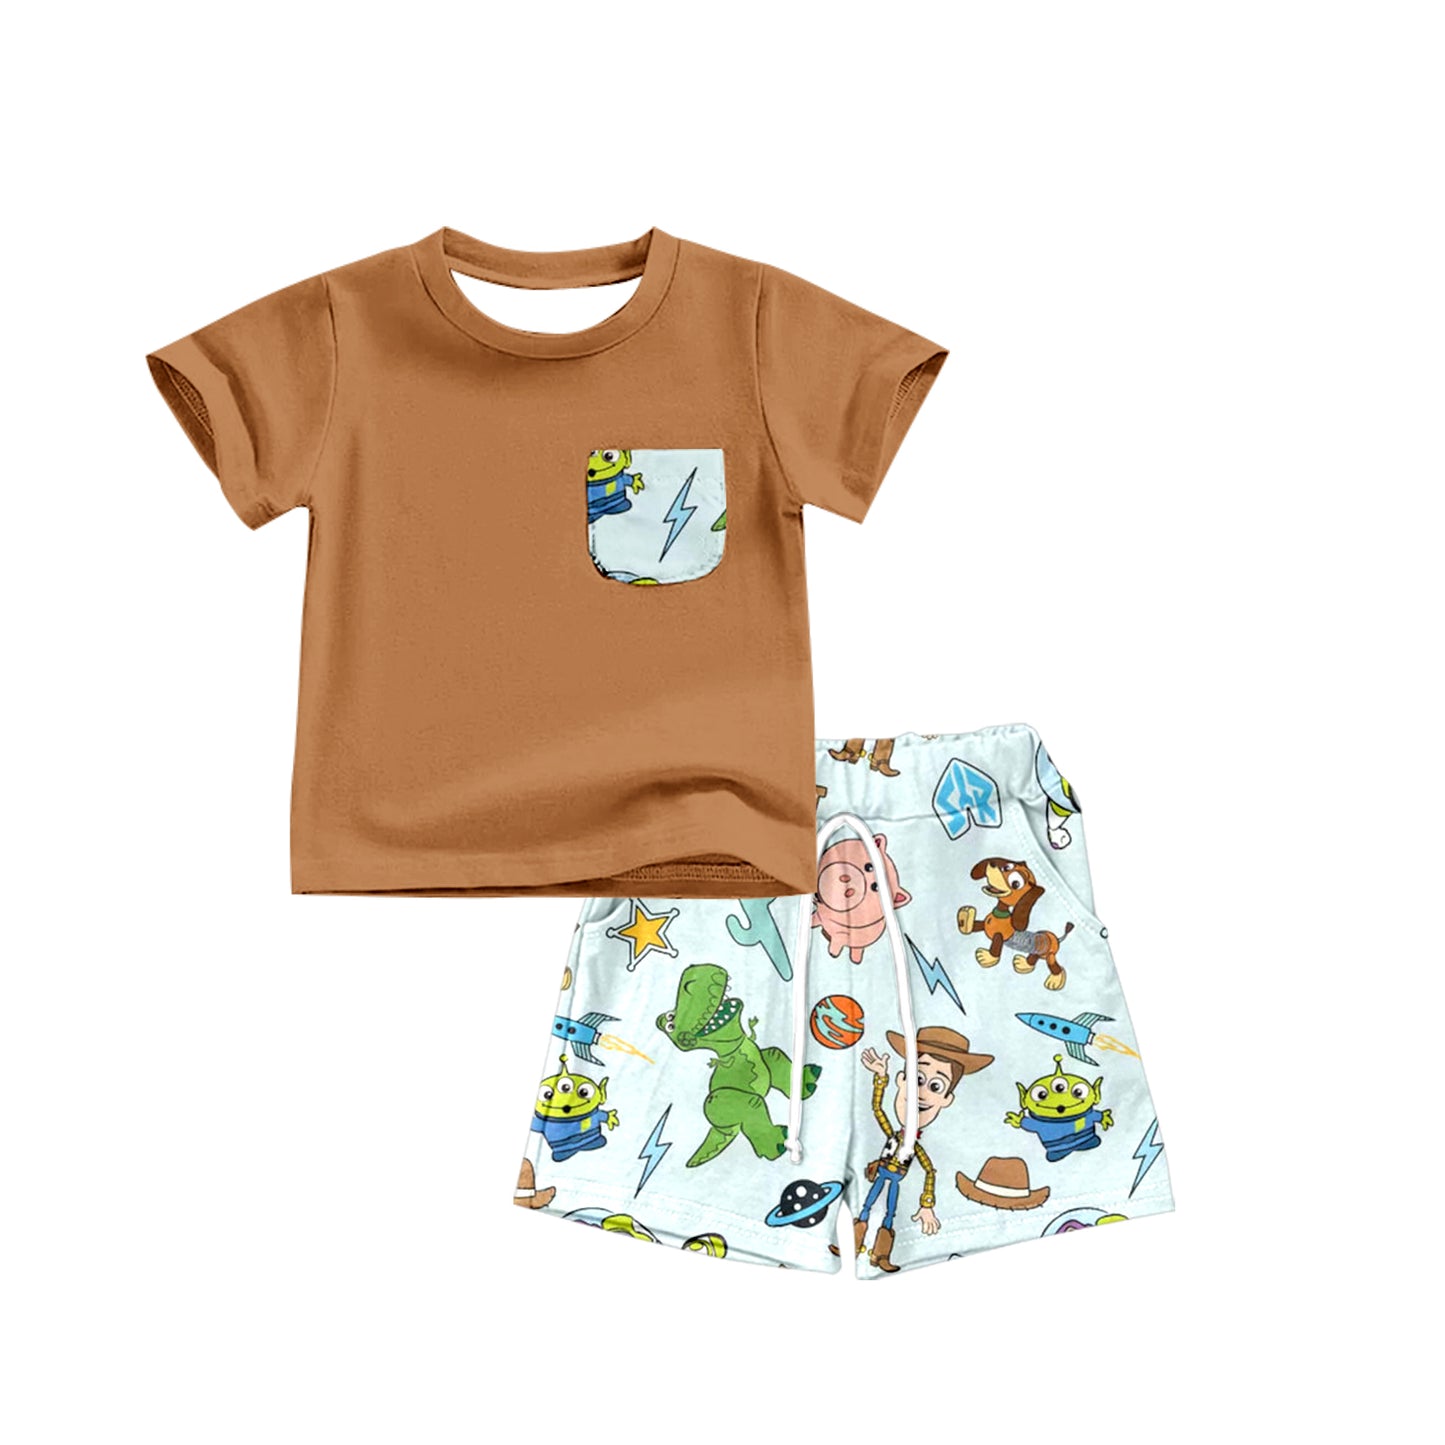 toddle baby boy cartoon outfit